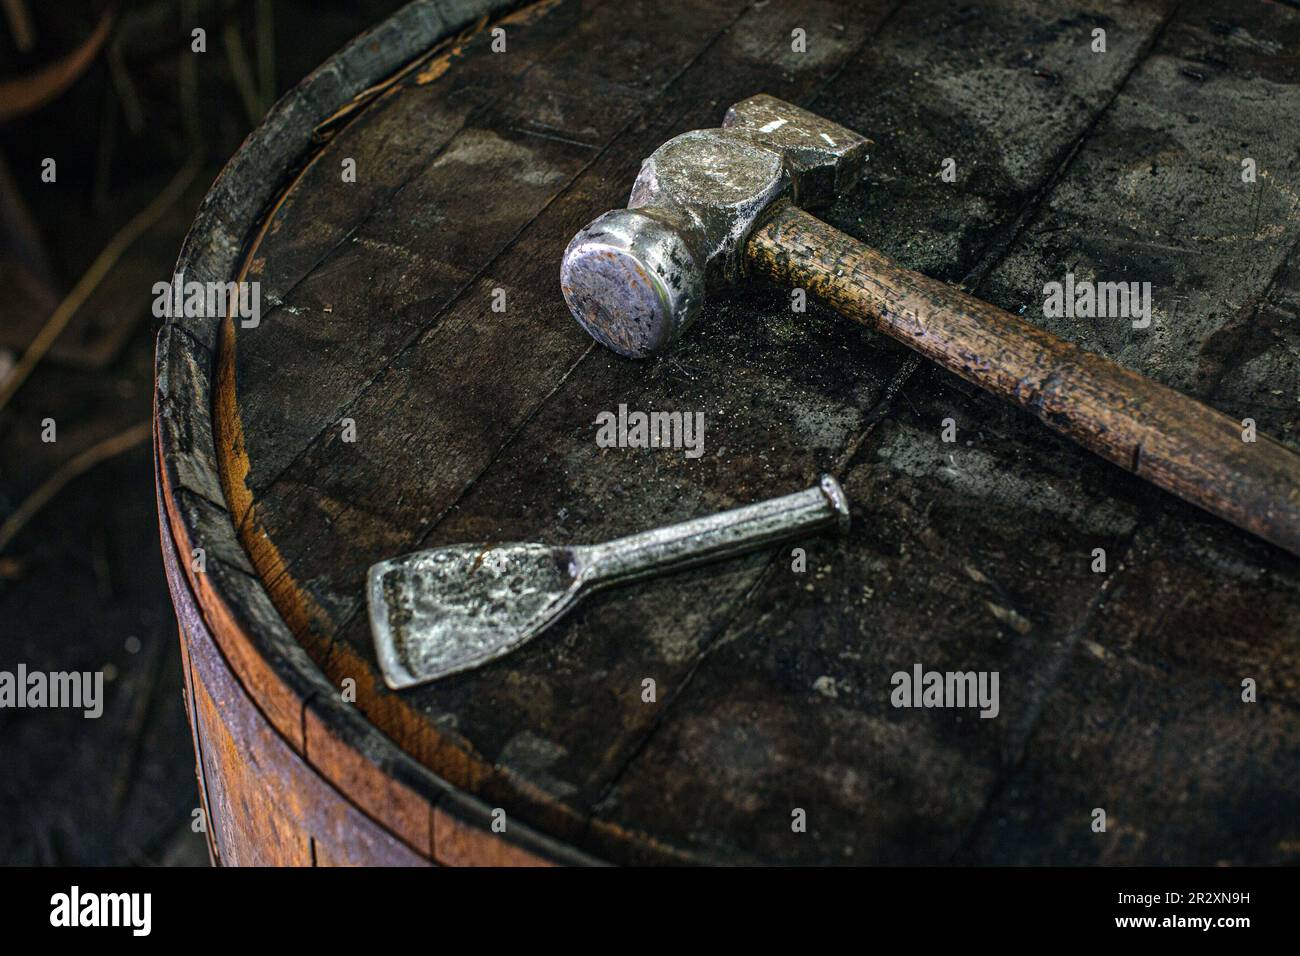 Hammer and chisel the tools of a barrel maker at Speyside Cooperage, Craigellachie, Aberdeenshire, Scotland Stock Photo